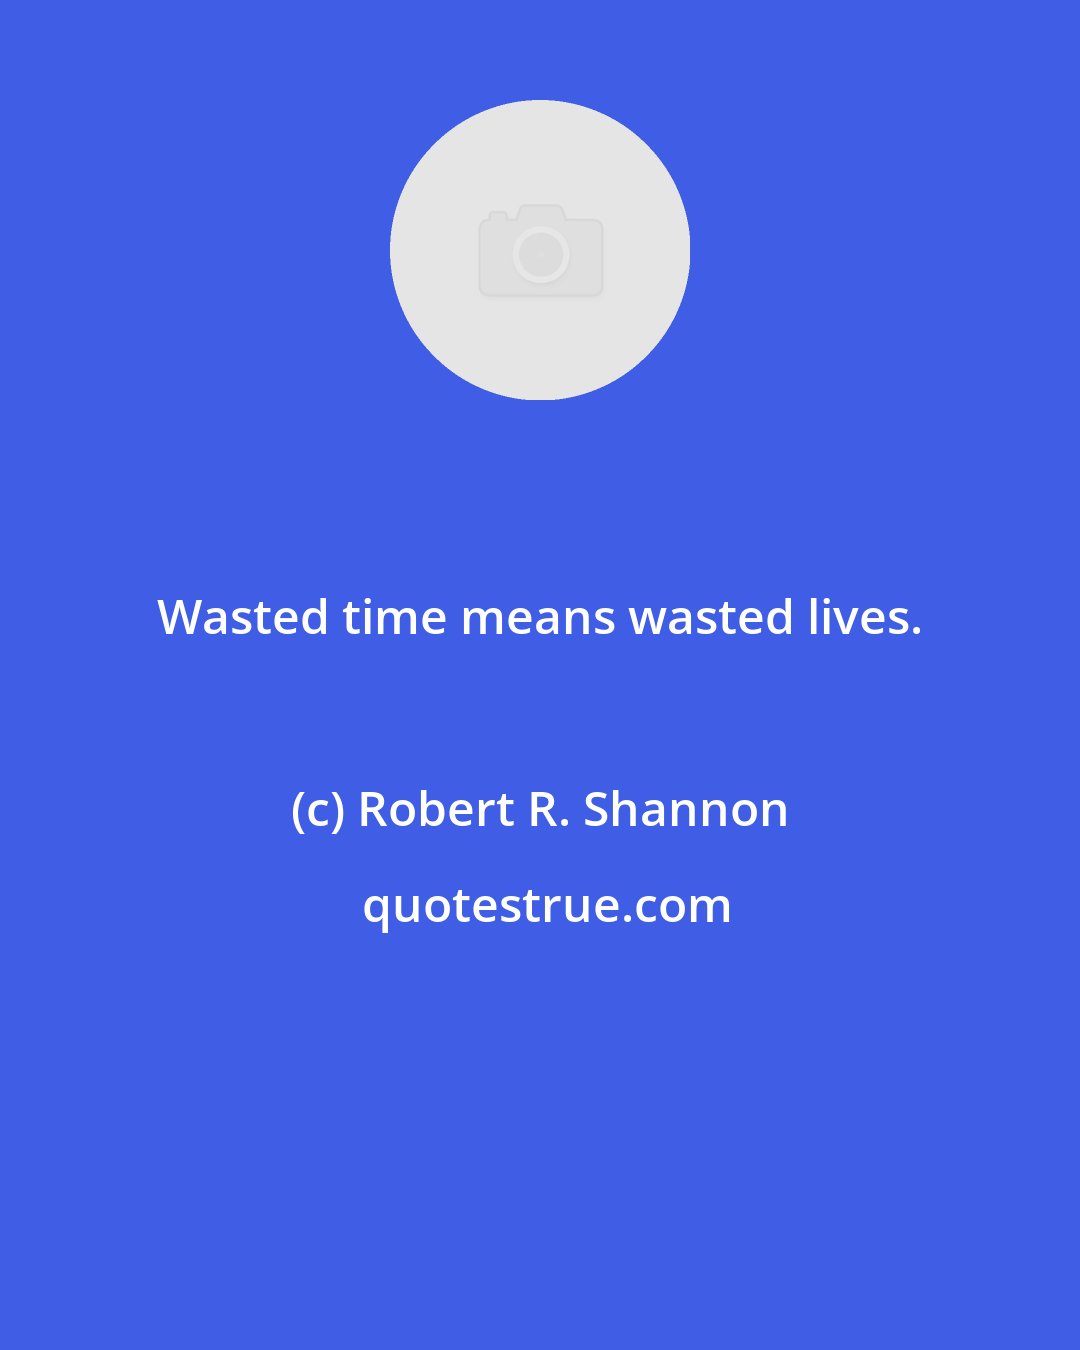 Robert R. Shannon: Wasted time means wasted lives.